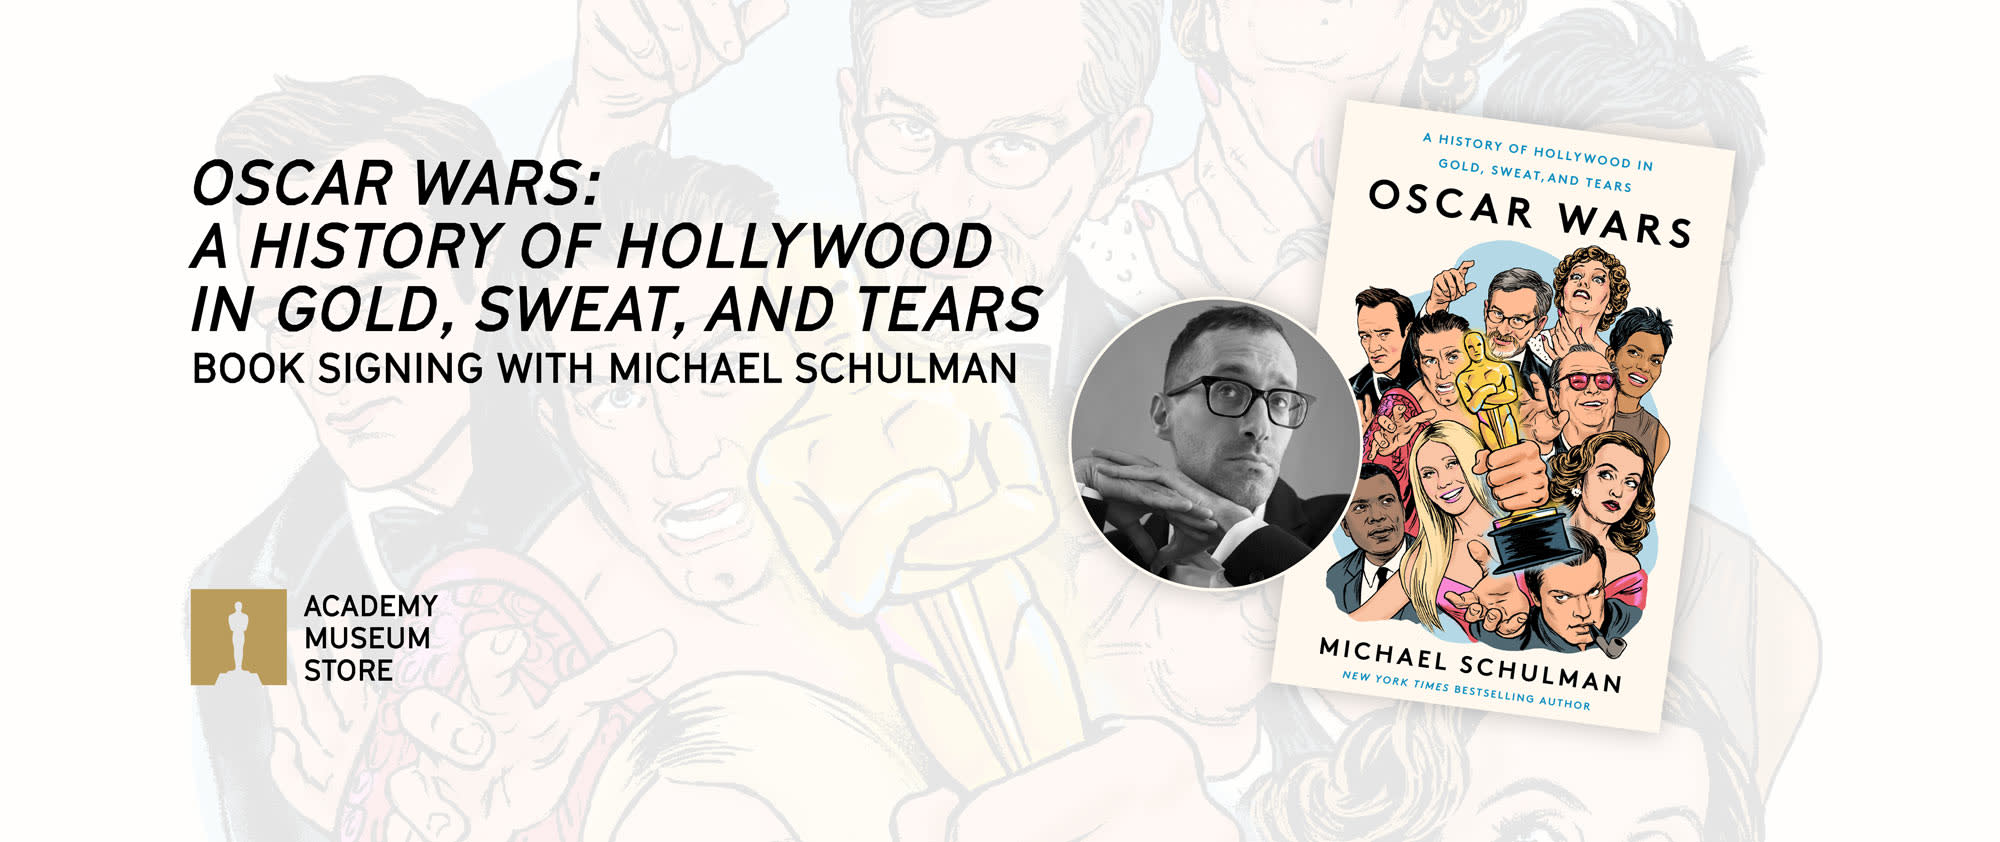 Oscar Wars: A History of Hollywood in Gold, Sweat, and Tears Book